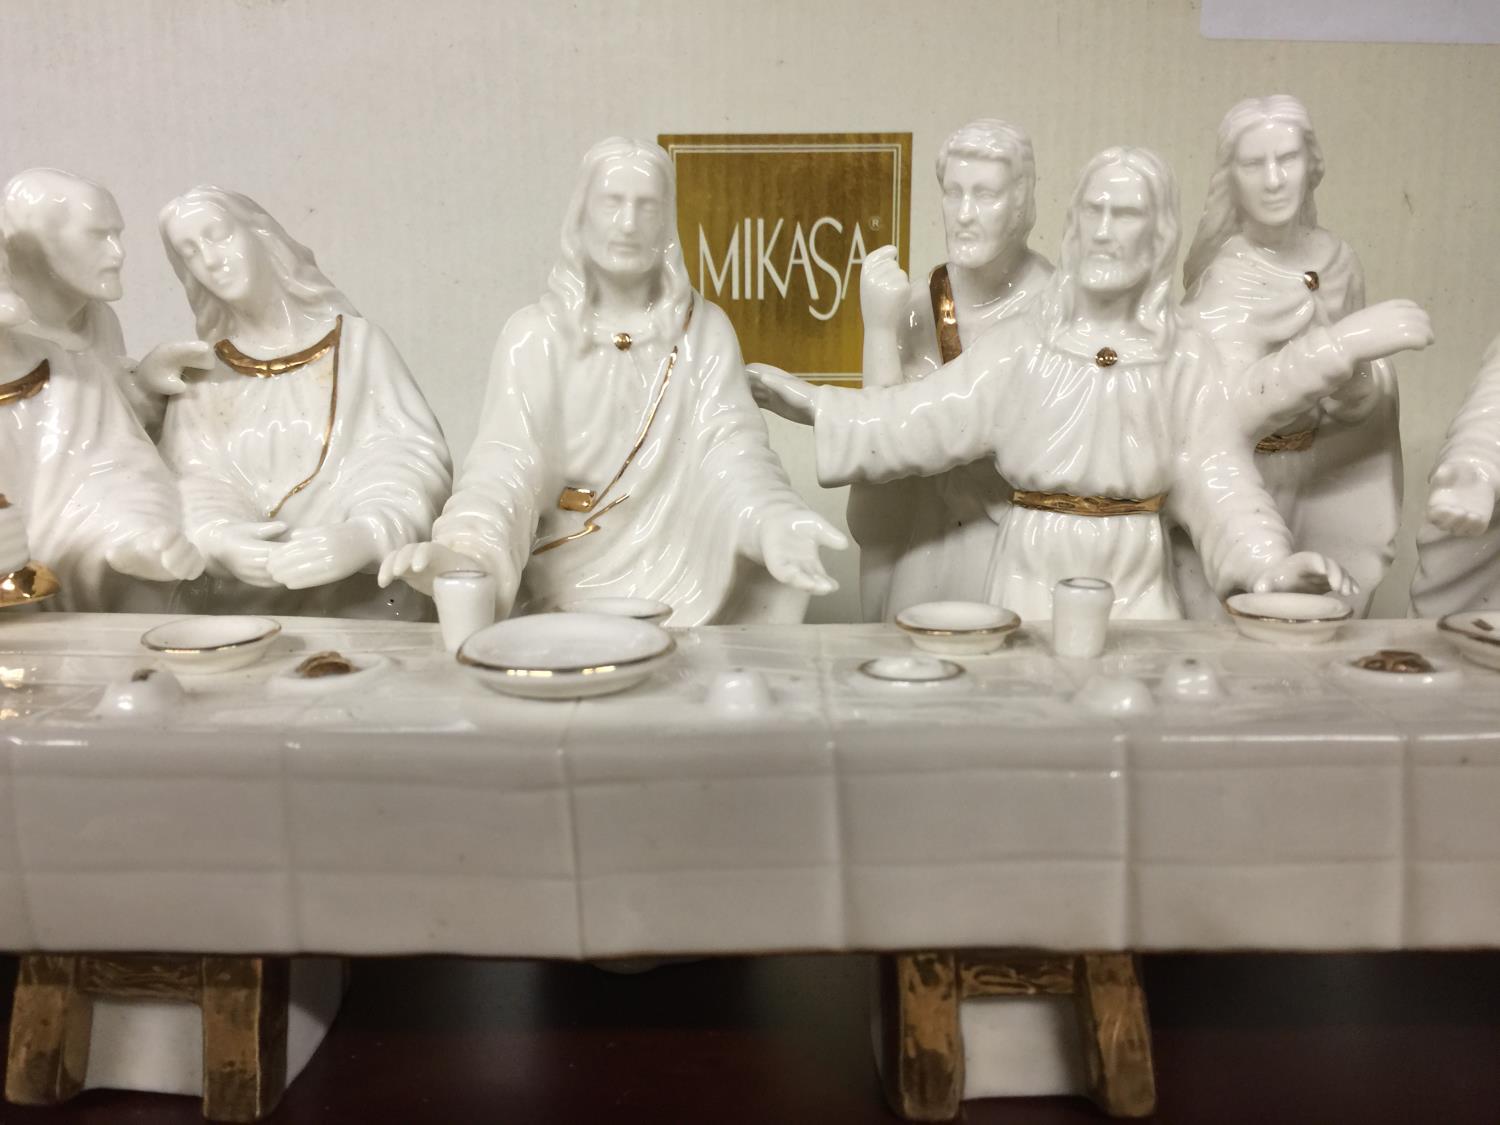 A CERAMIC REPRESENTATION OF JESUS CHRIST WITH HIS DISCIPLES AT THE LAST SUPPER BY MIKASA - Image 2 of 4